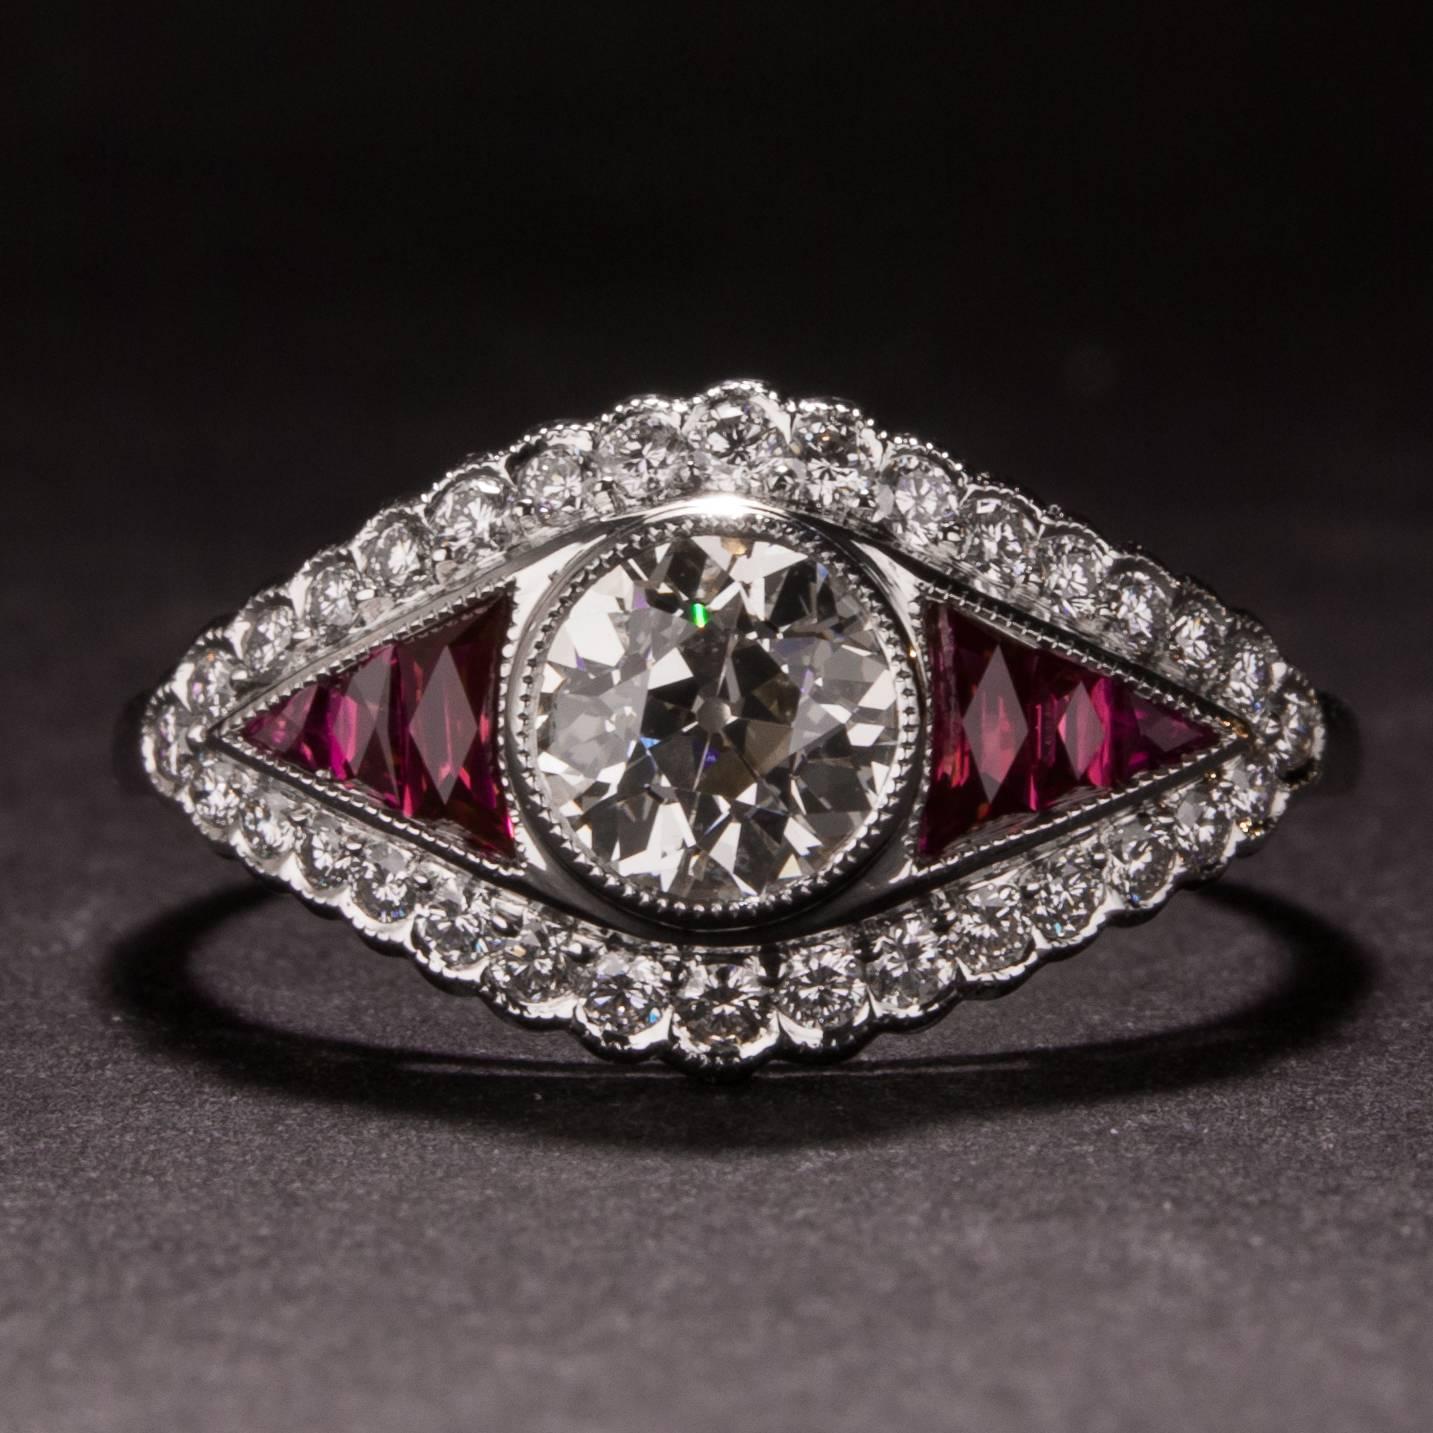 This lovely ring features a .76 carat old mine cut center diamond (Estimated J color, VS1 clarity) and 6 rubies weighing a total of 1.25 carats. The mounting is crafted in platinum and has an additional .31 total carats of accent diamonds. 

This